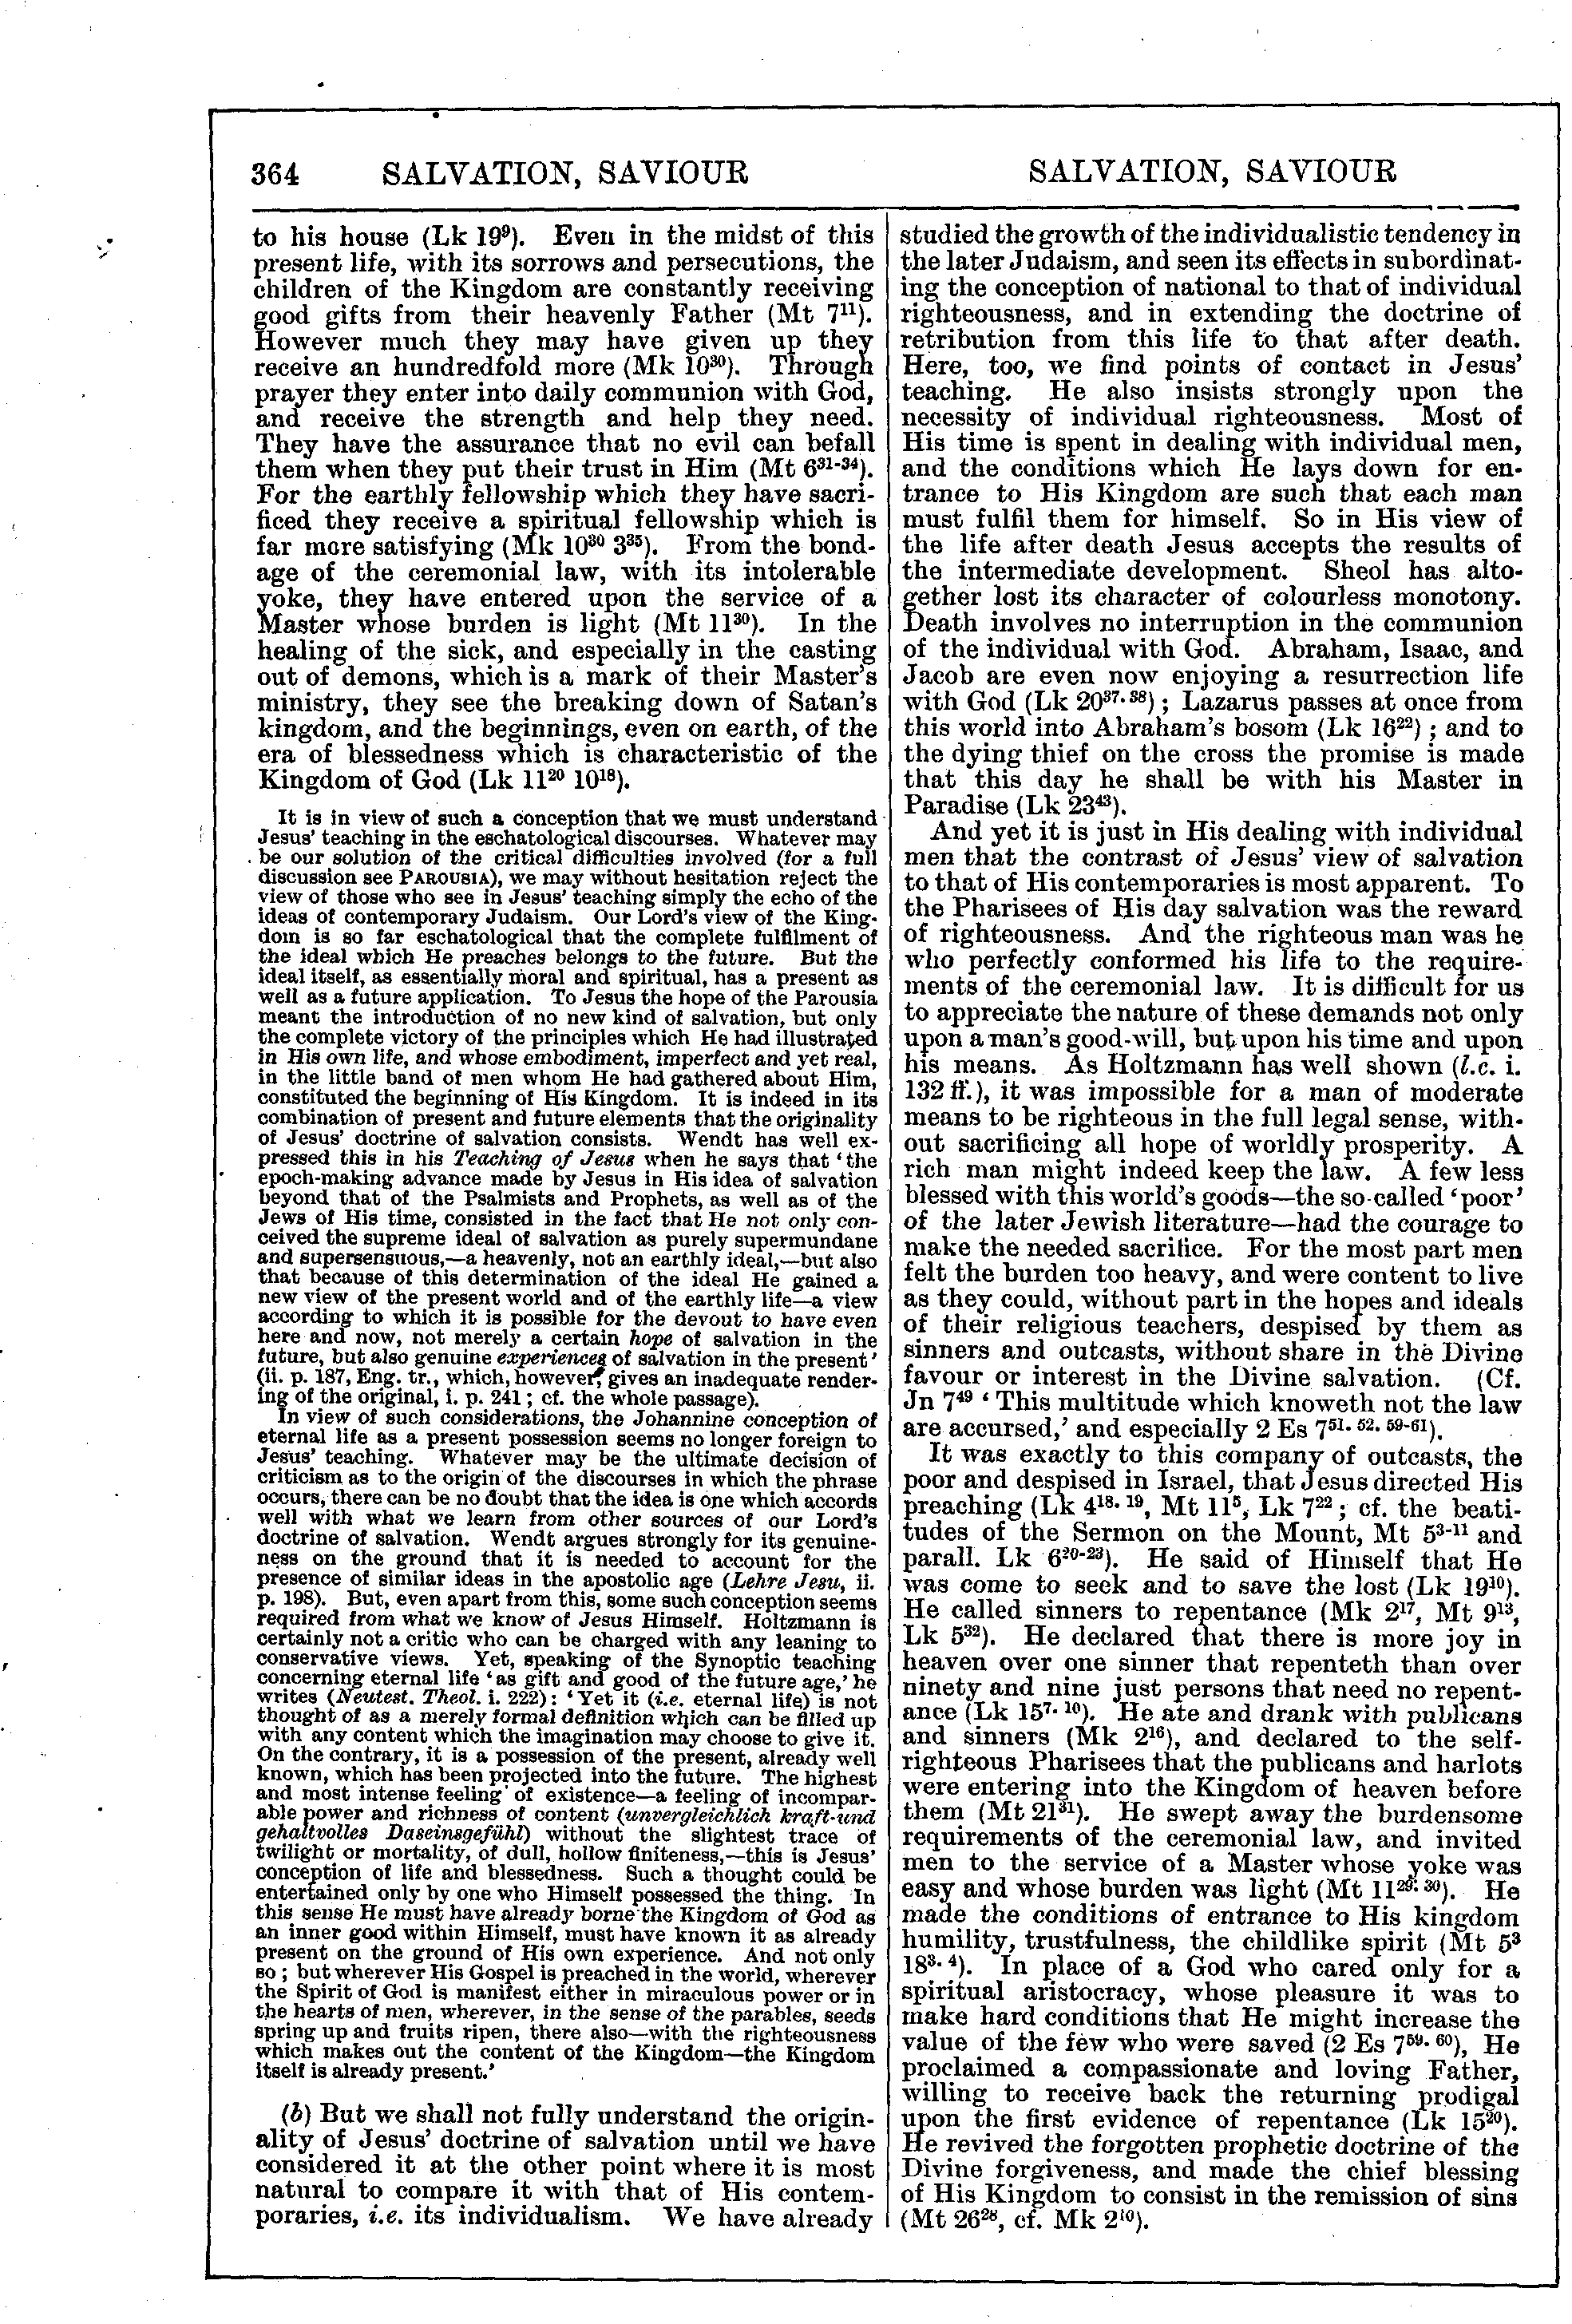 Image of page 364